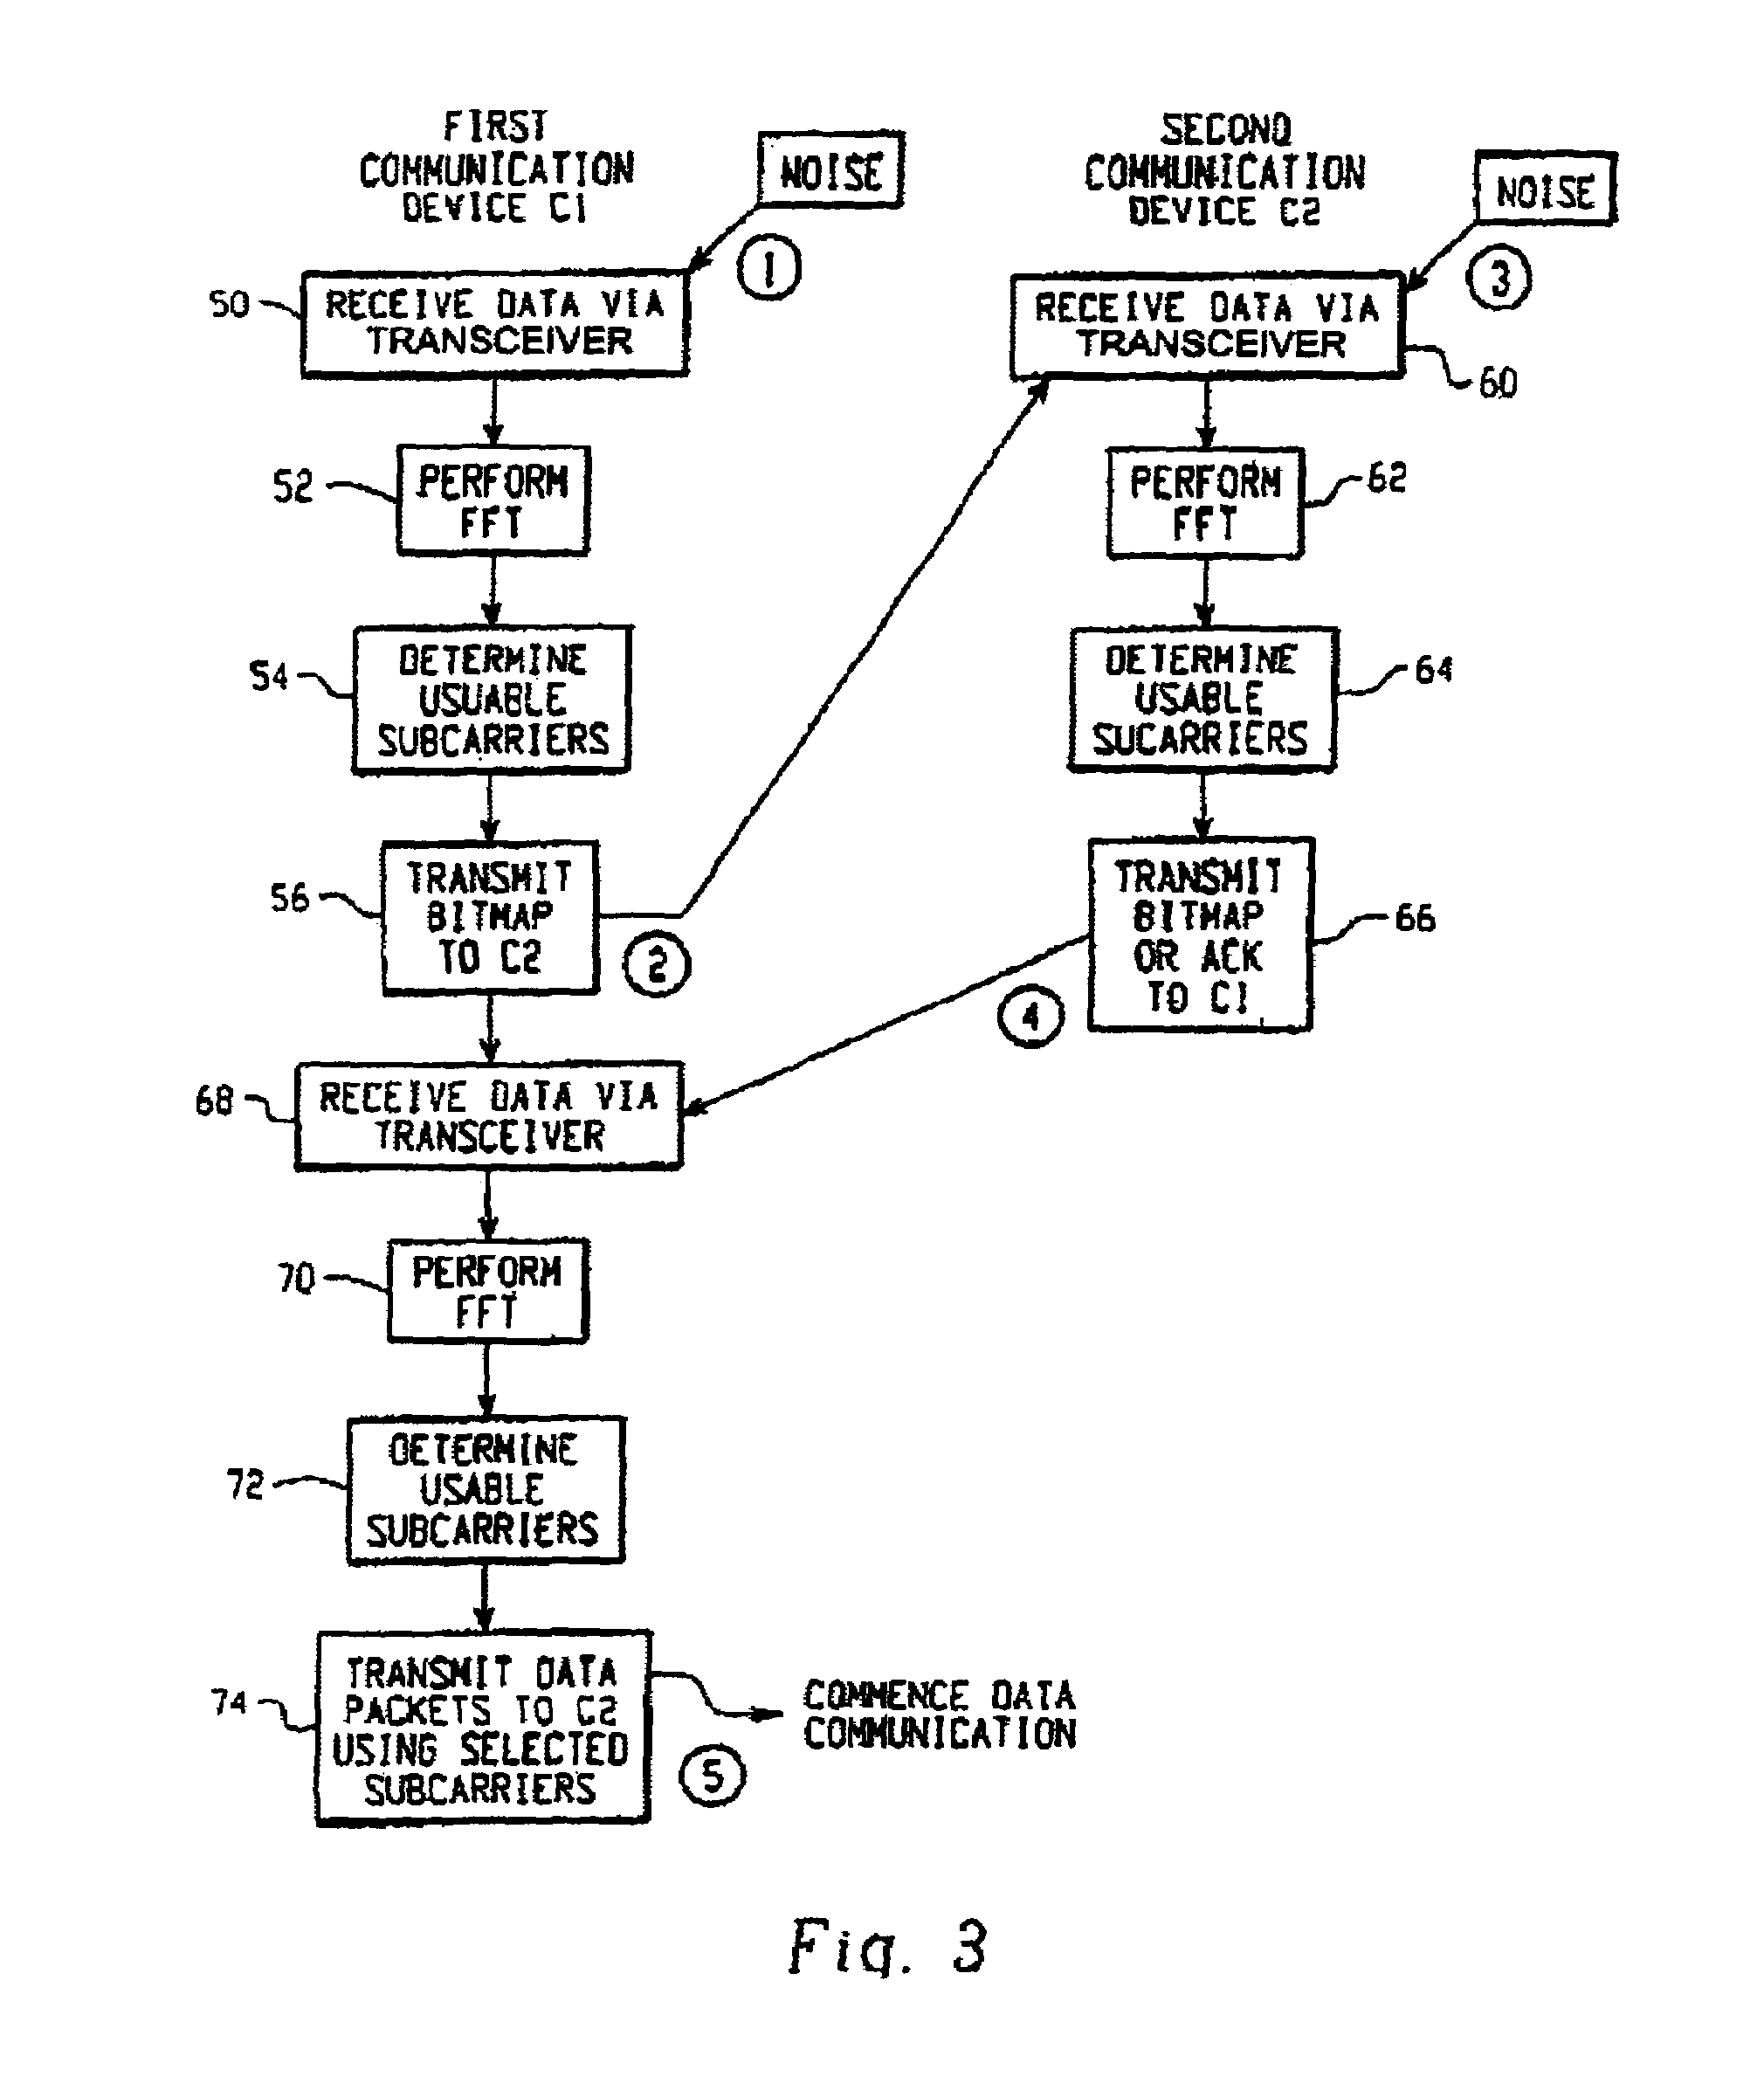 Adaptive control system for interference rejections in a wireless communications system